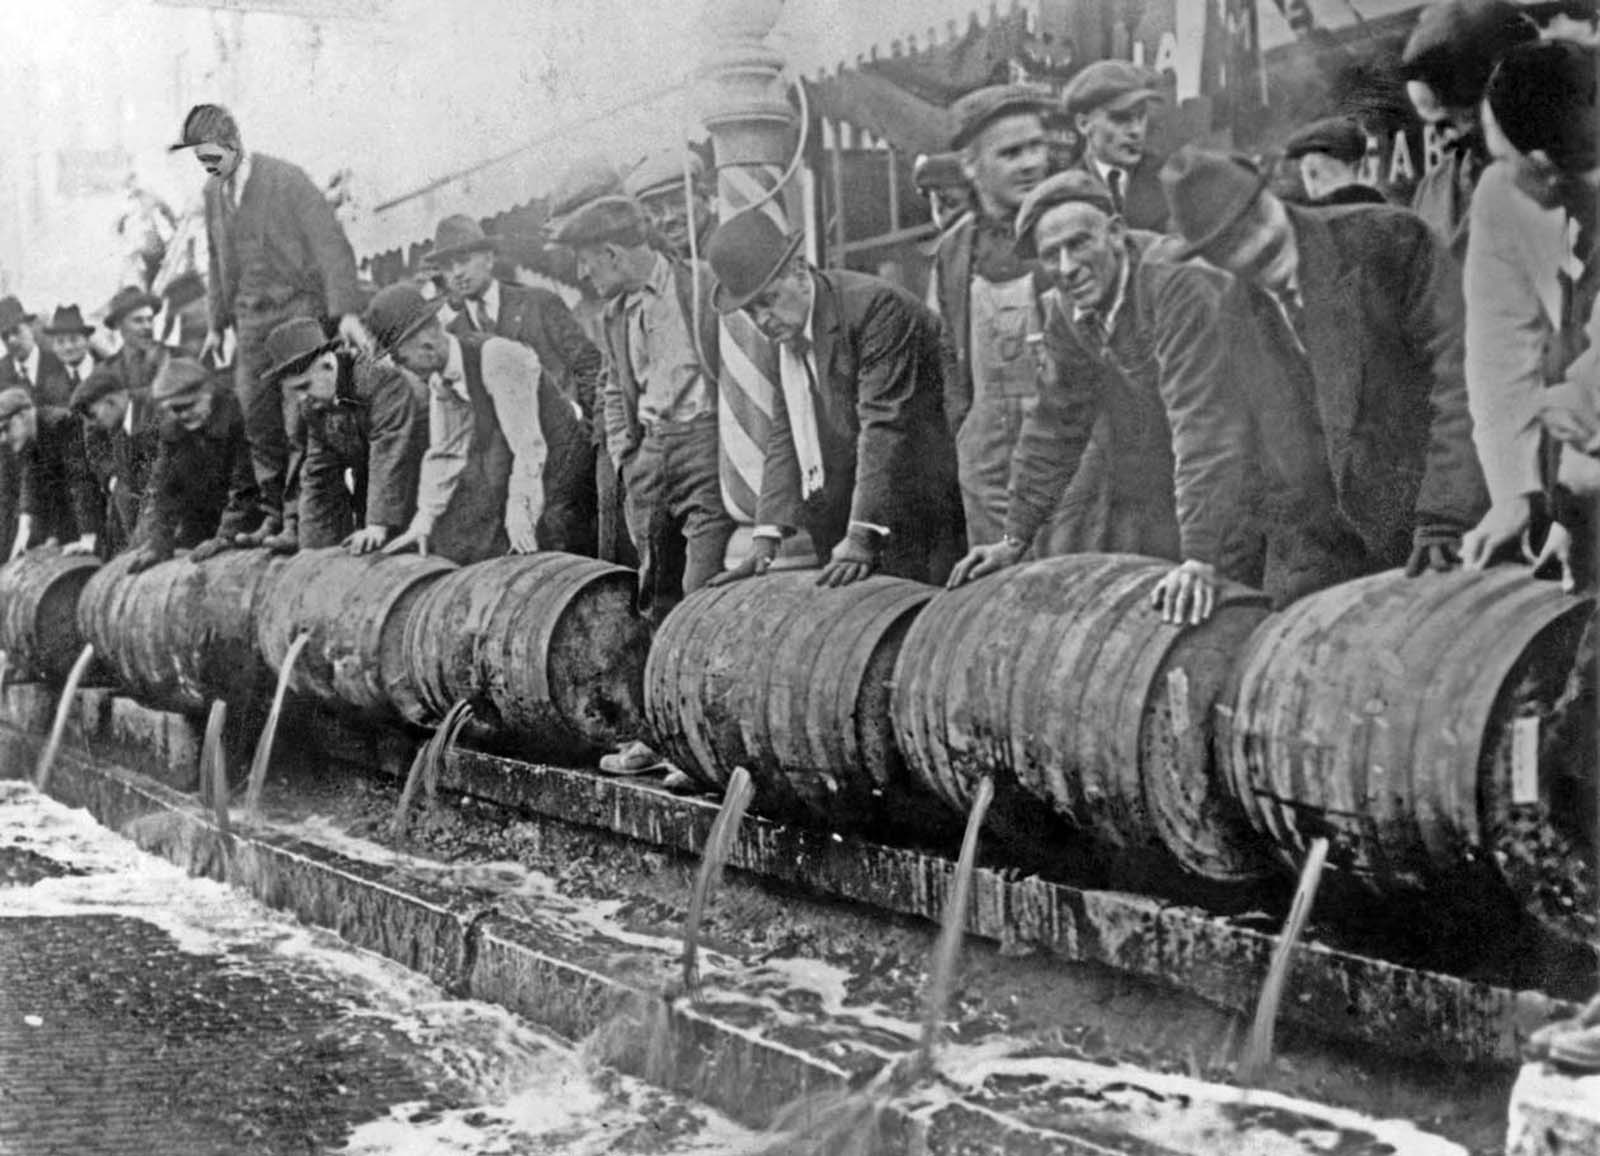 Barrels of beer emptied into the sewer by authorities during prohibition.